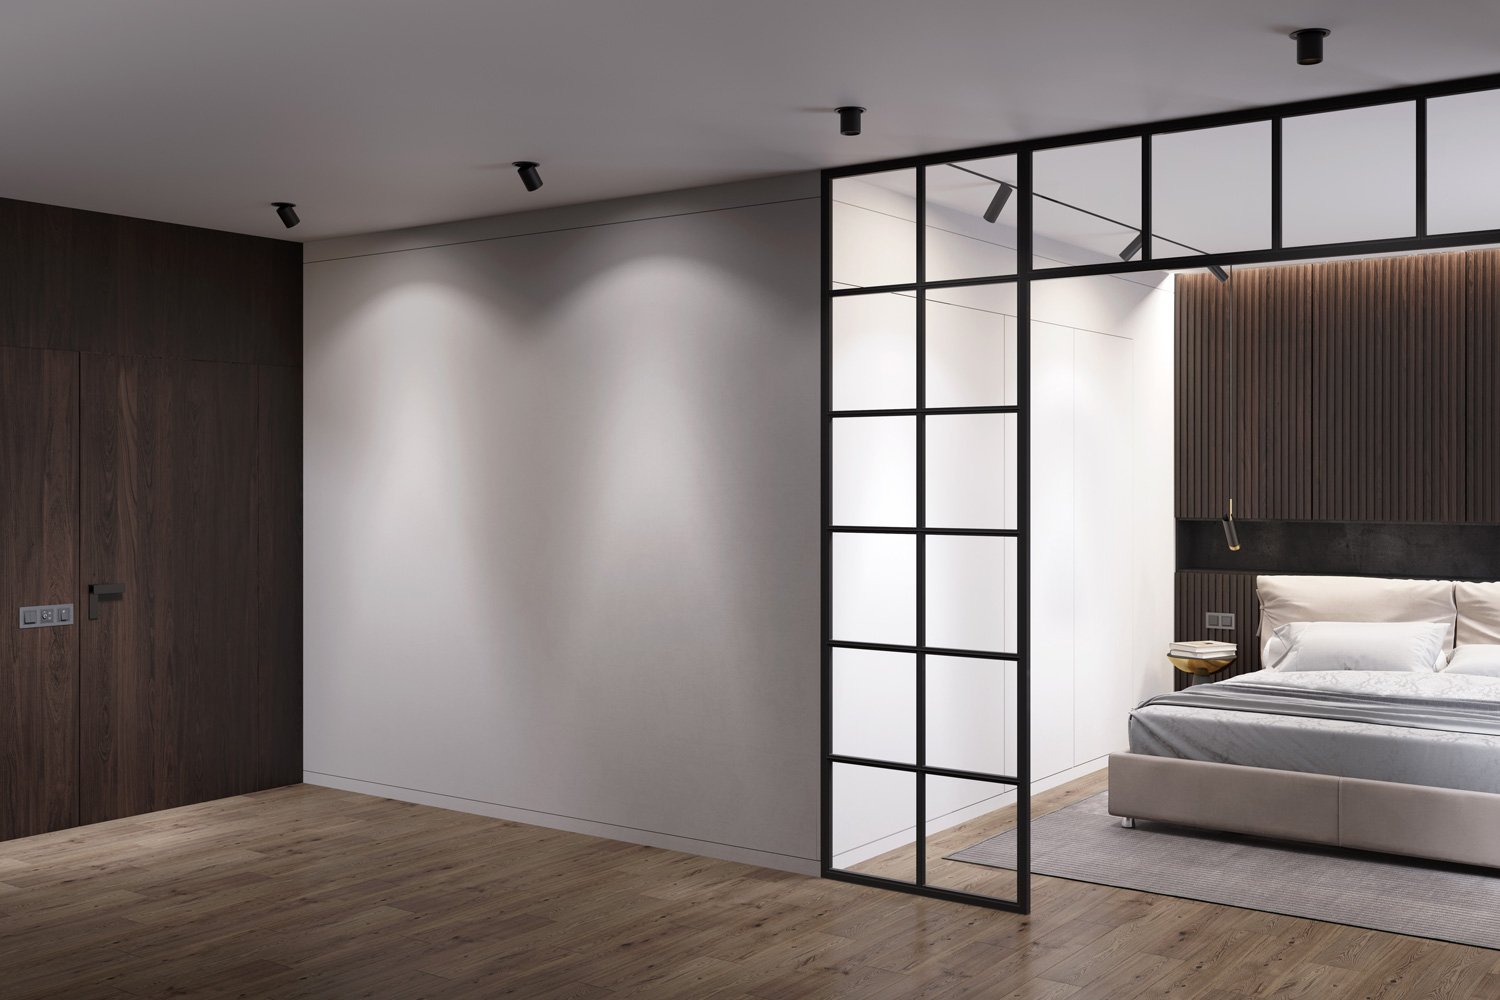 Dark modern interior with a gray wall illuminated by two spotlights, a dark wood door, a modern room divider, a bedroom with dark wood cabinets over a beige bed, a closet in the background.